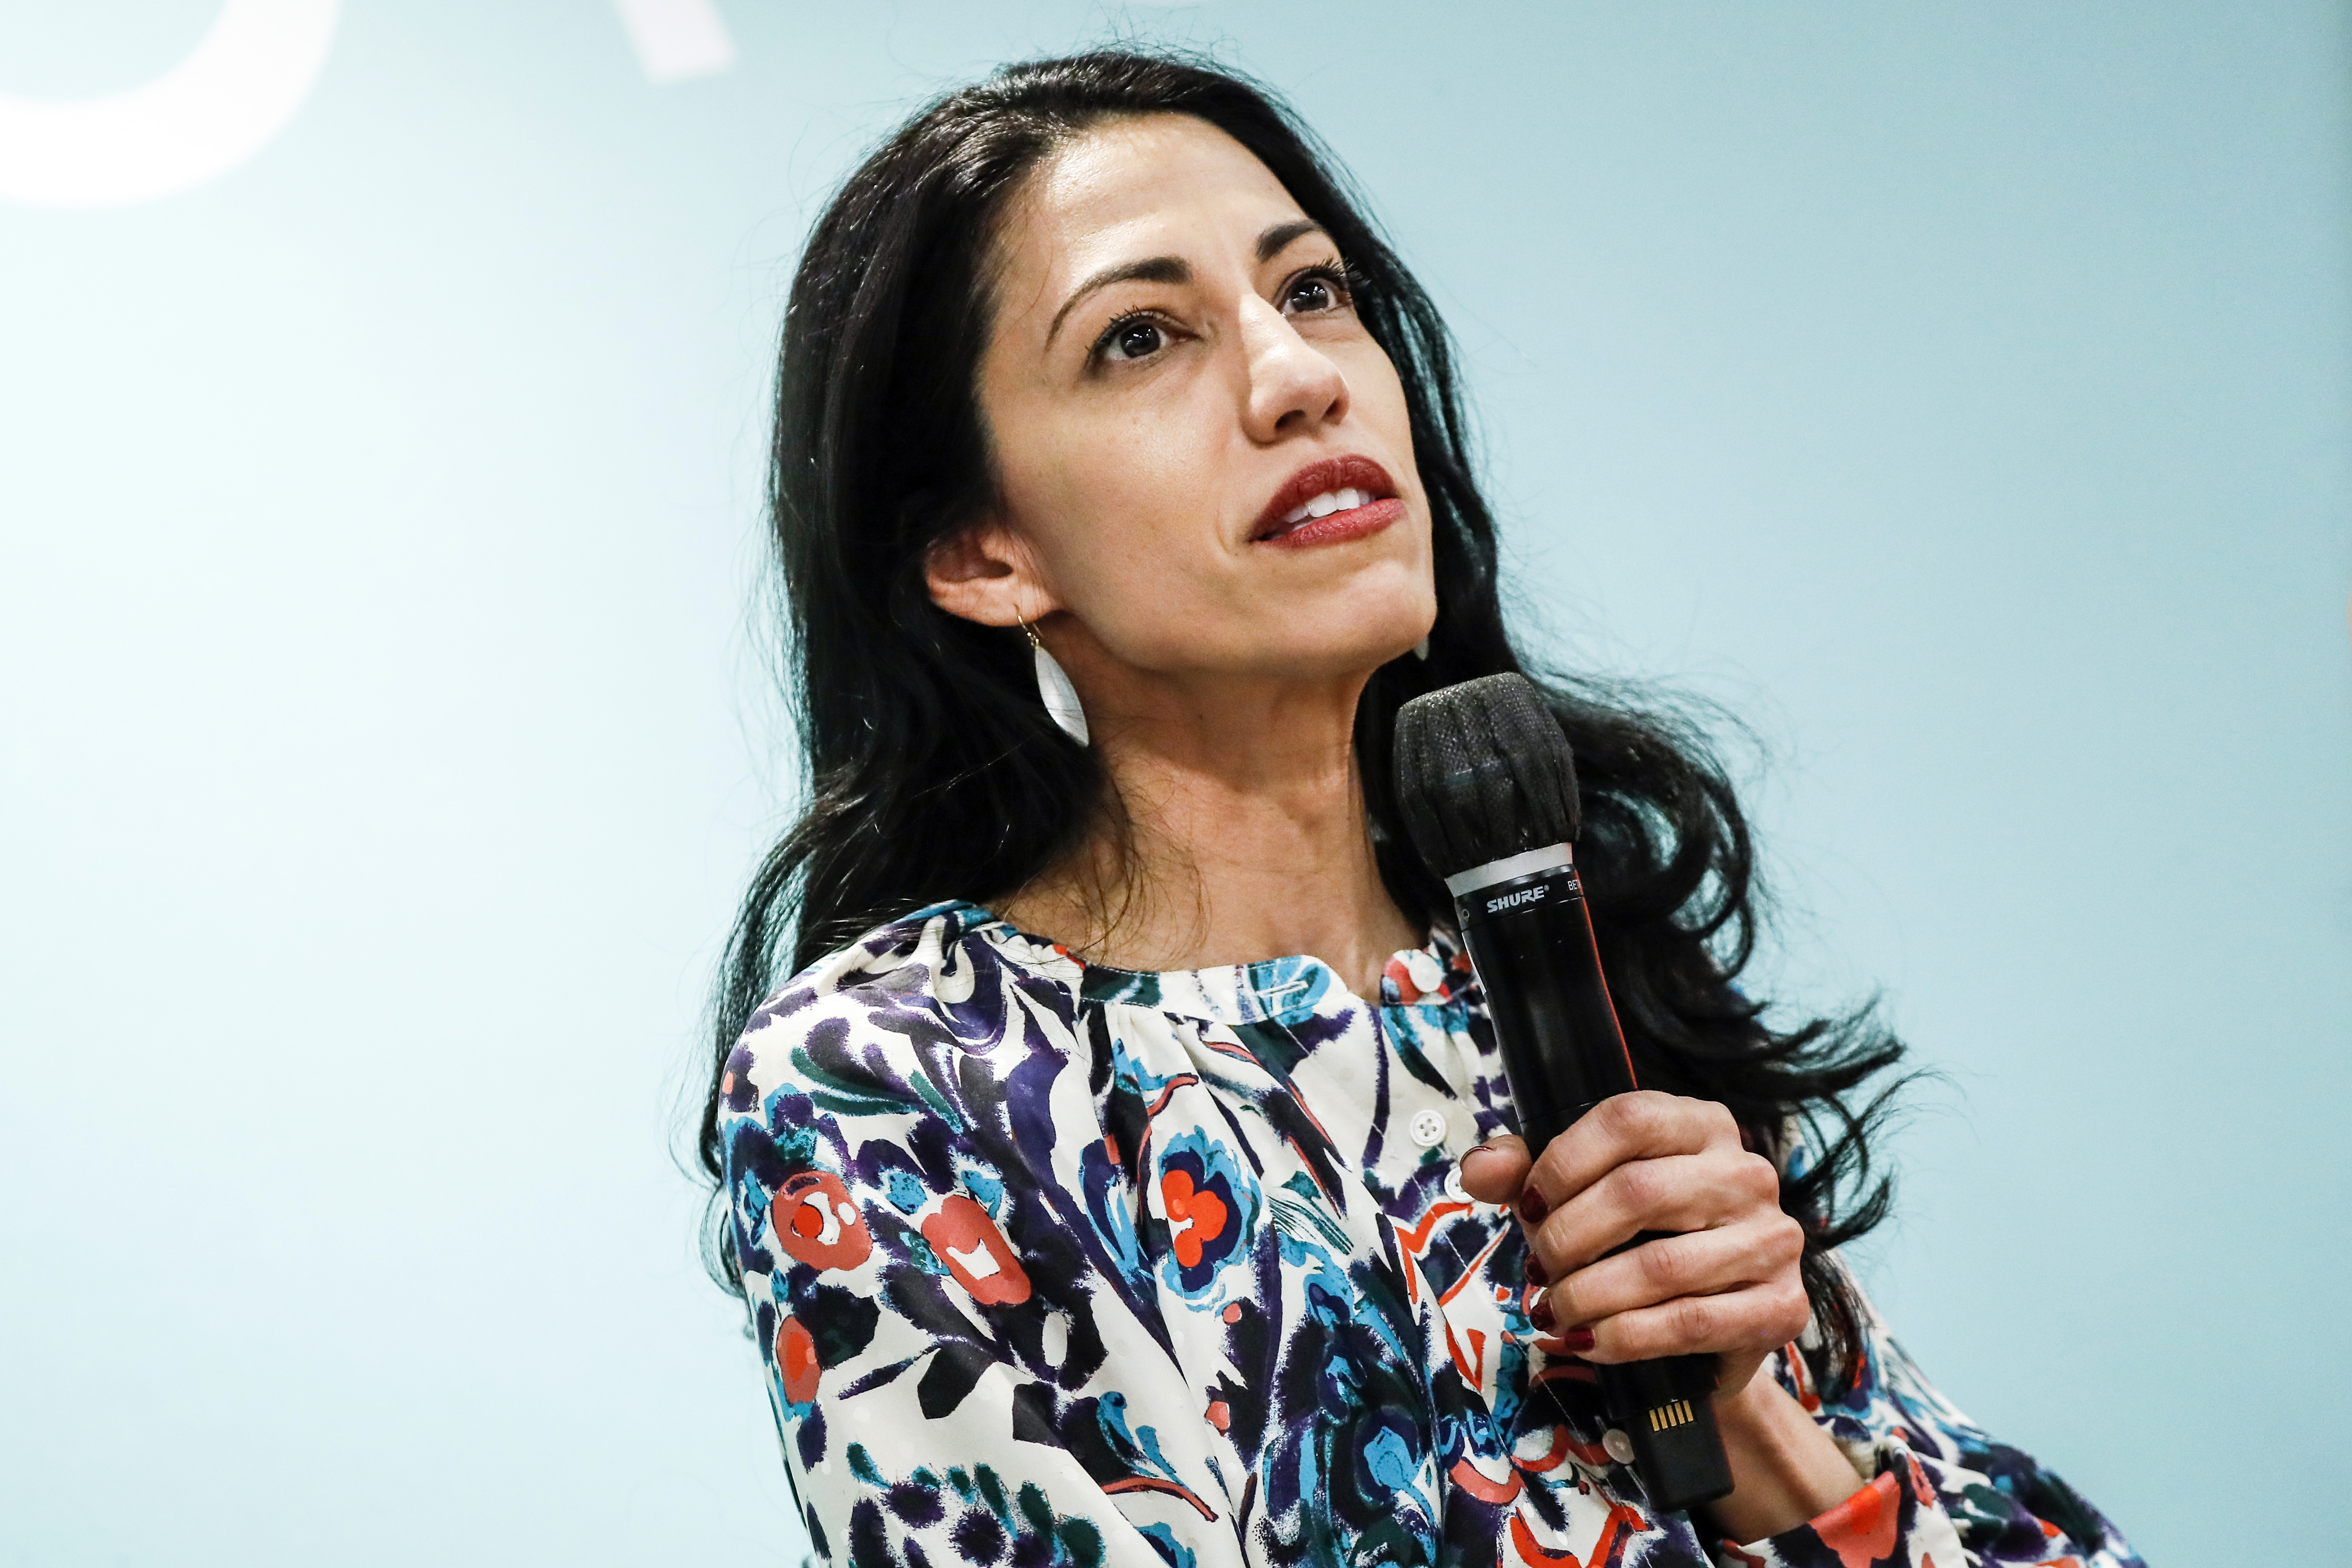 Huma Abedin speaks during a panel discussion at the Vital Voices Global Headquarters for Women’s Leadership grand opening festival on May 05, 2022, in Washington, DC